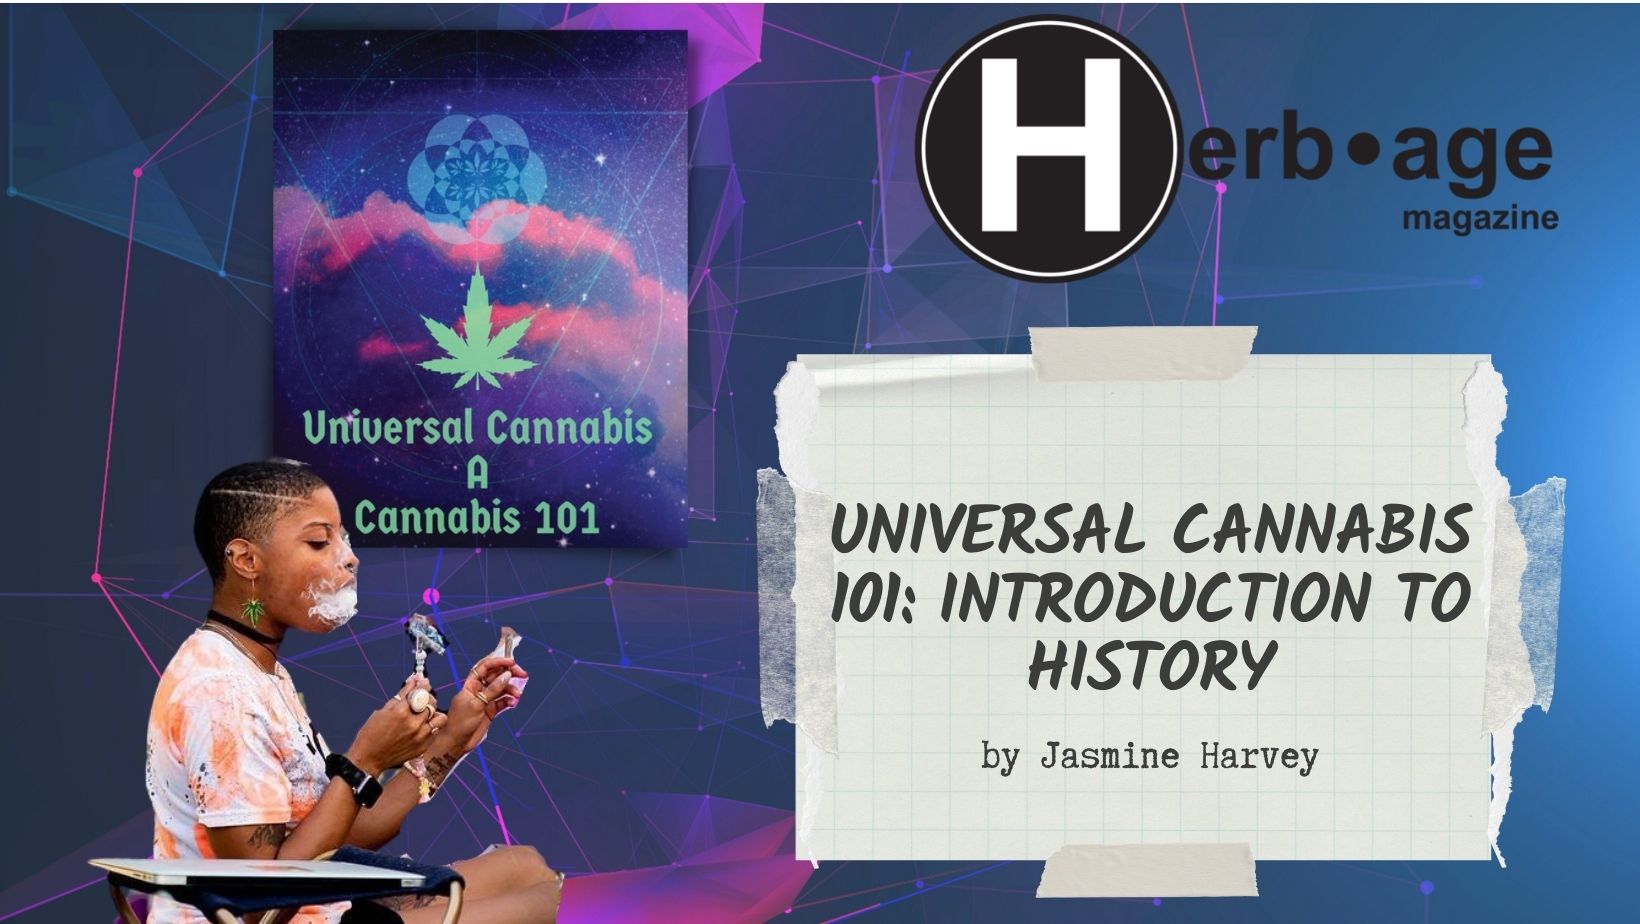 Universal Cannabis 101: Introduction to History